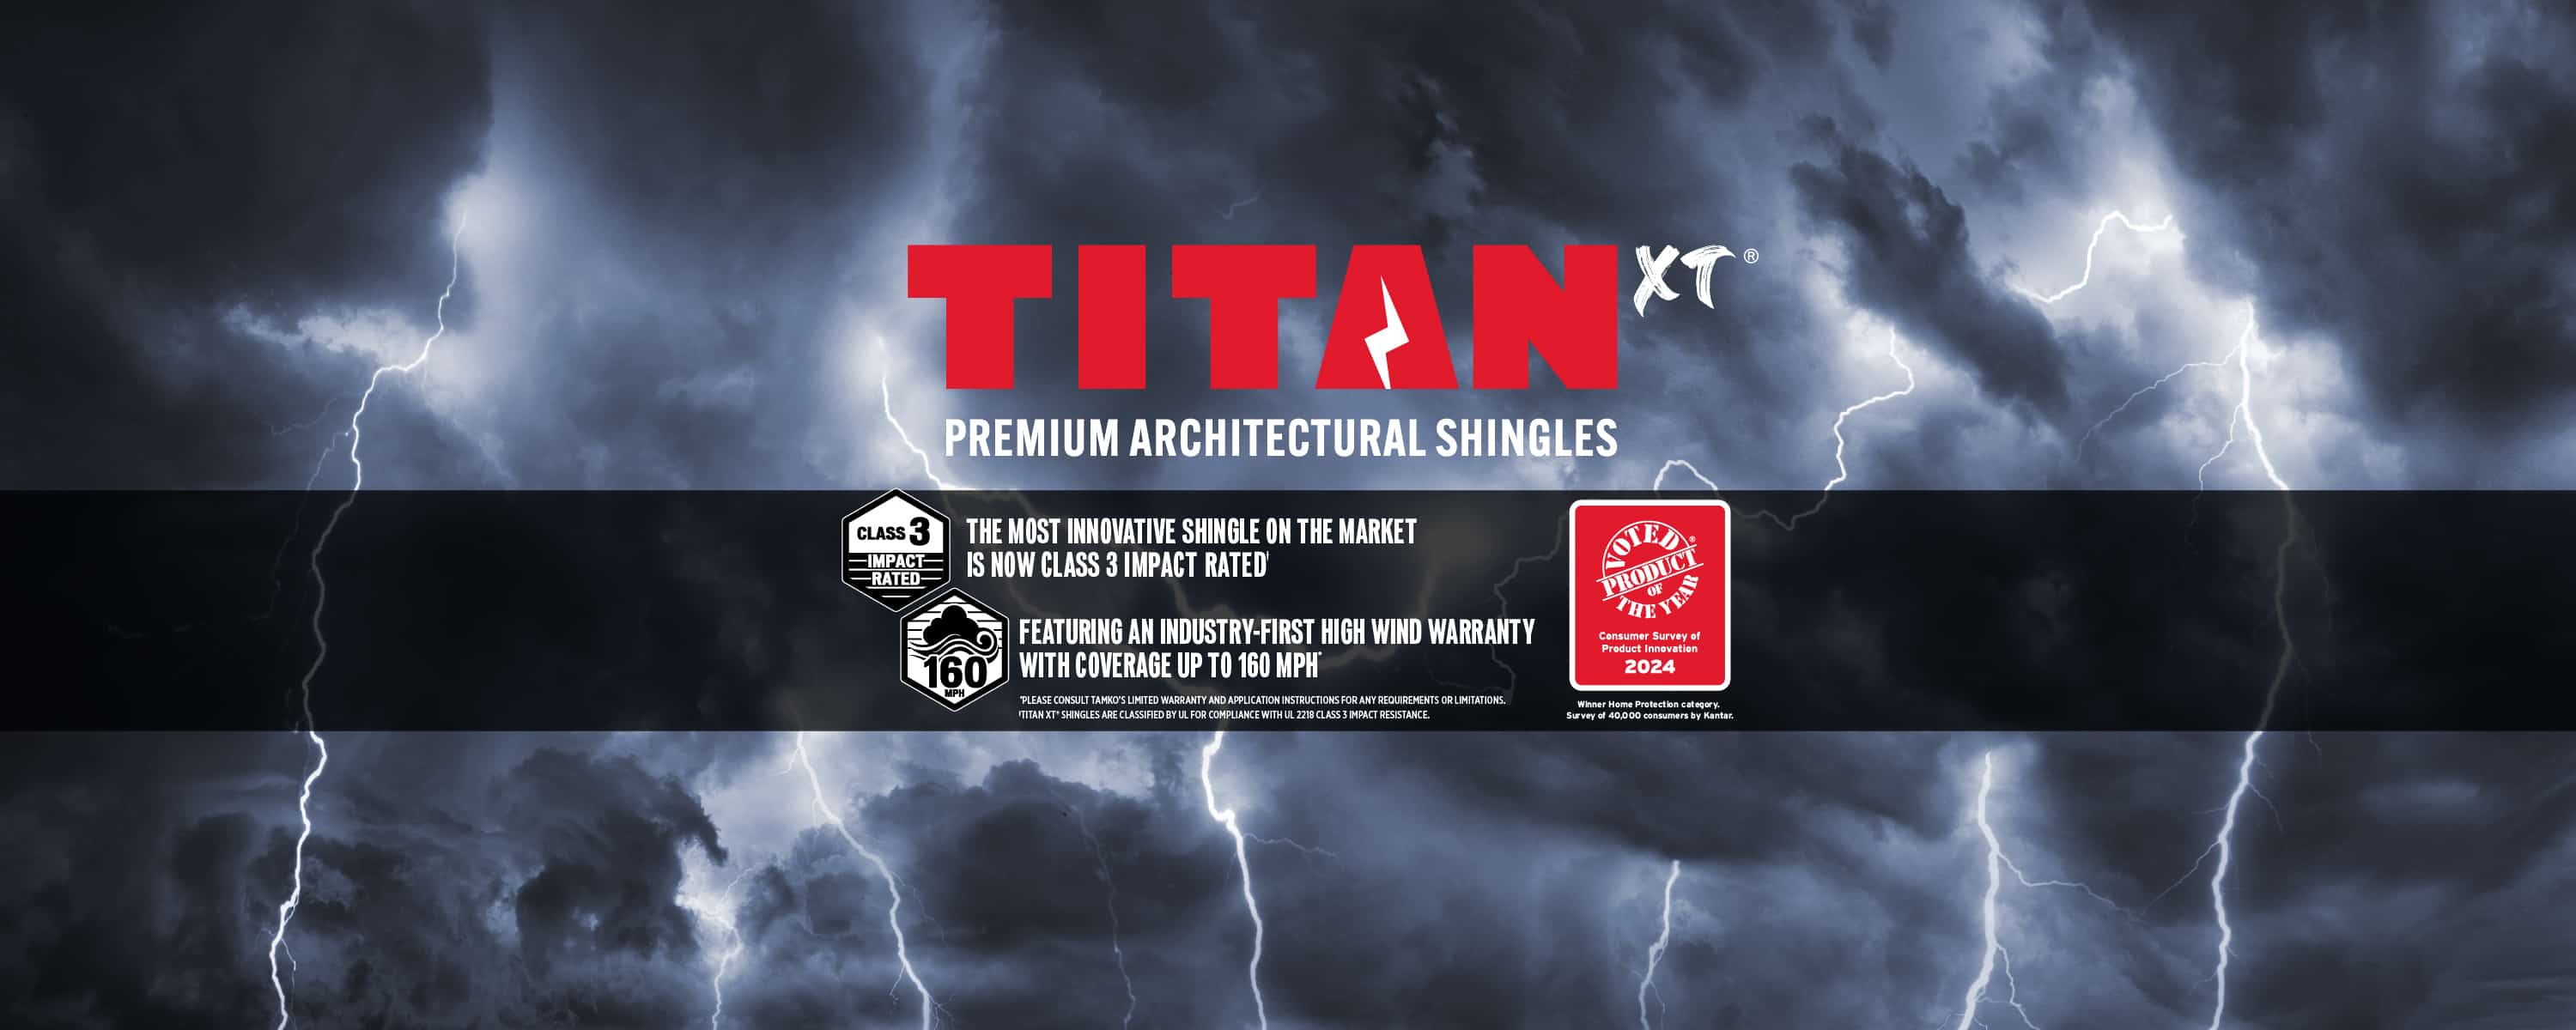 Titan XT 2024 Product of the Year - Class 3 + 160 MPH